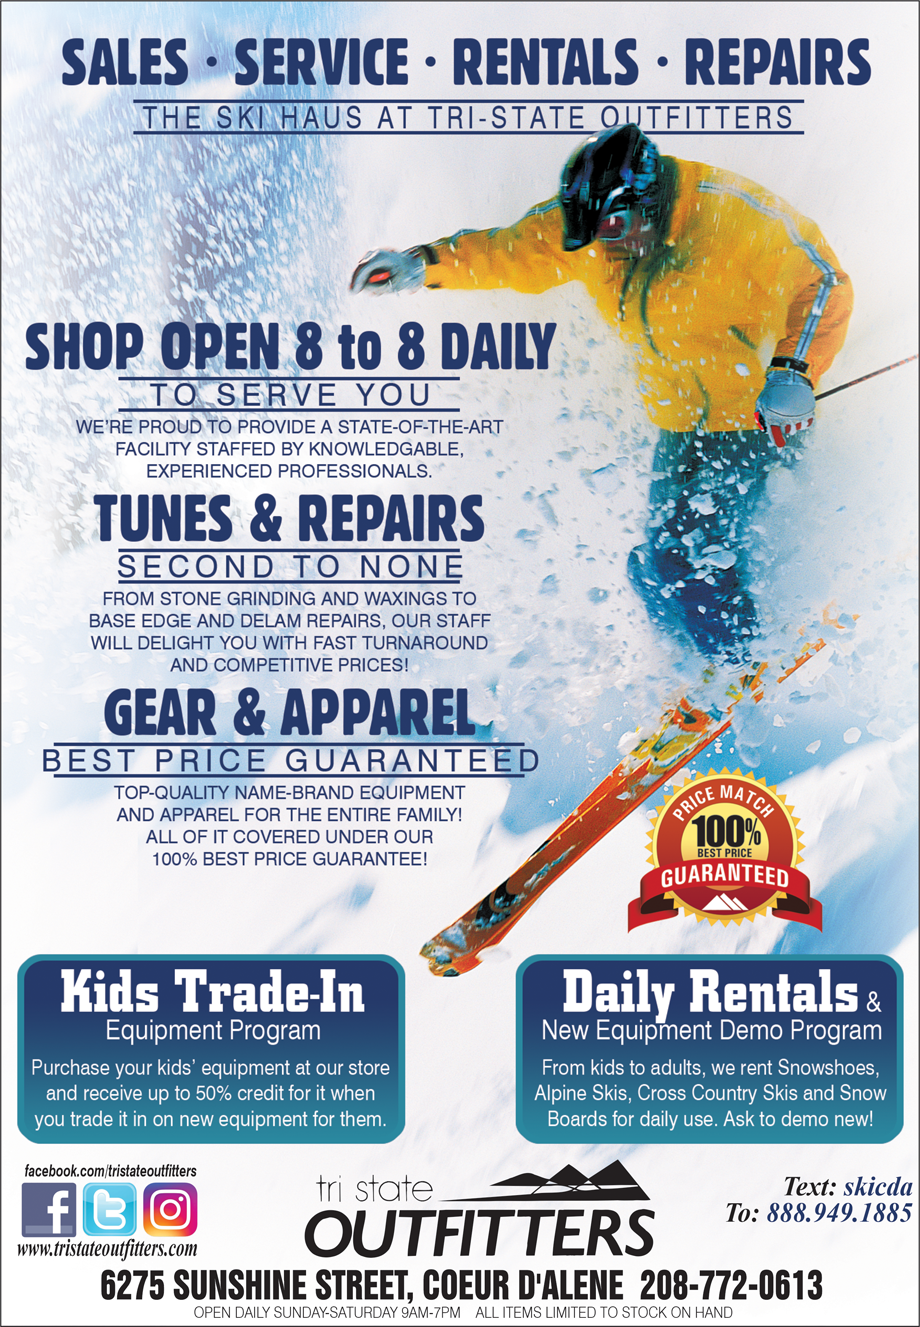 CDA – The Ski Haus at Tri-State Outfitters